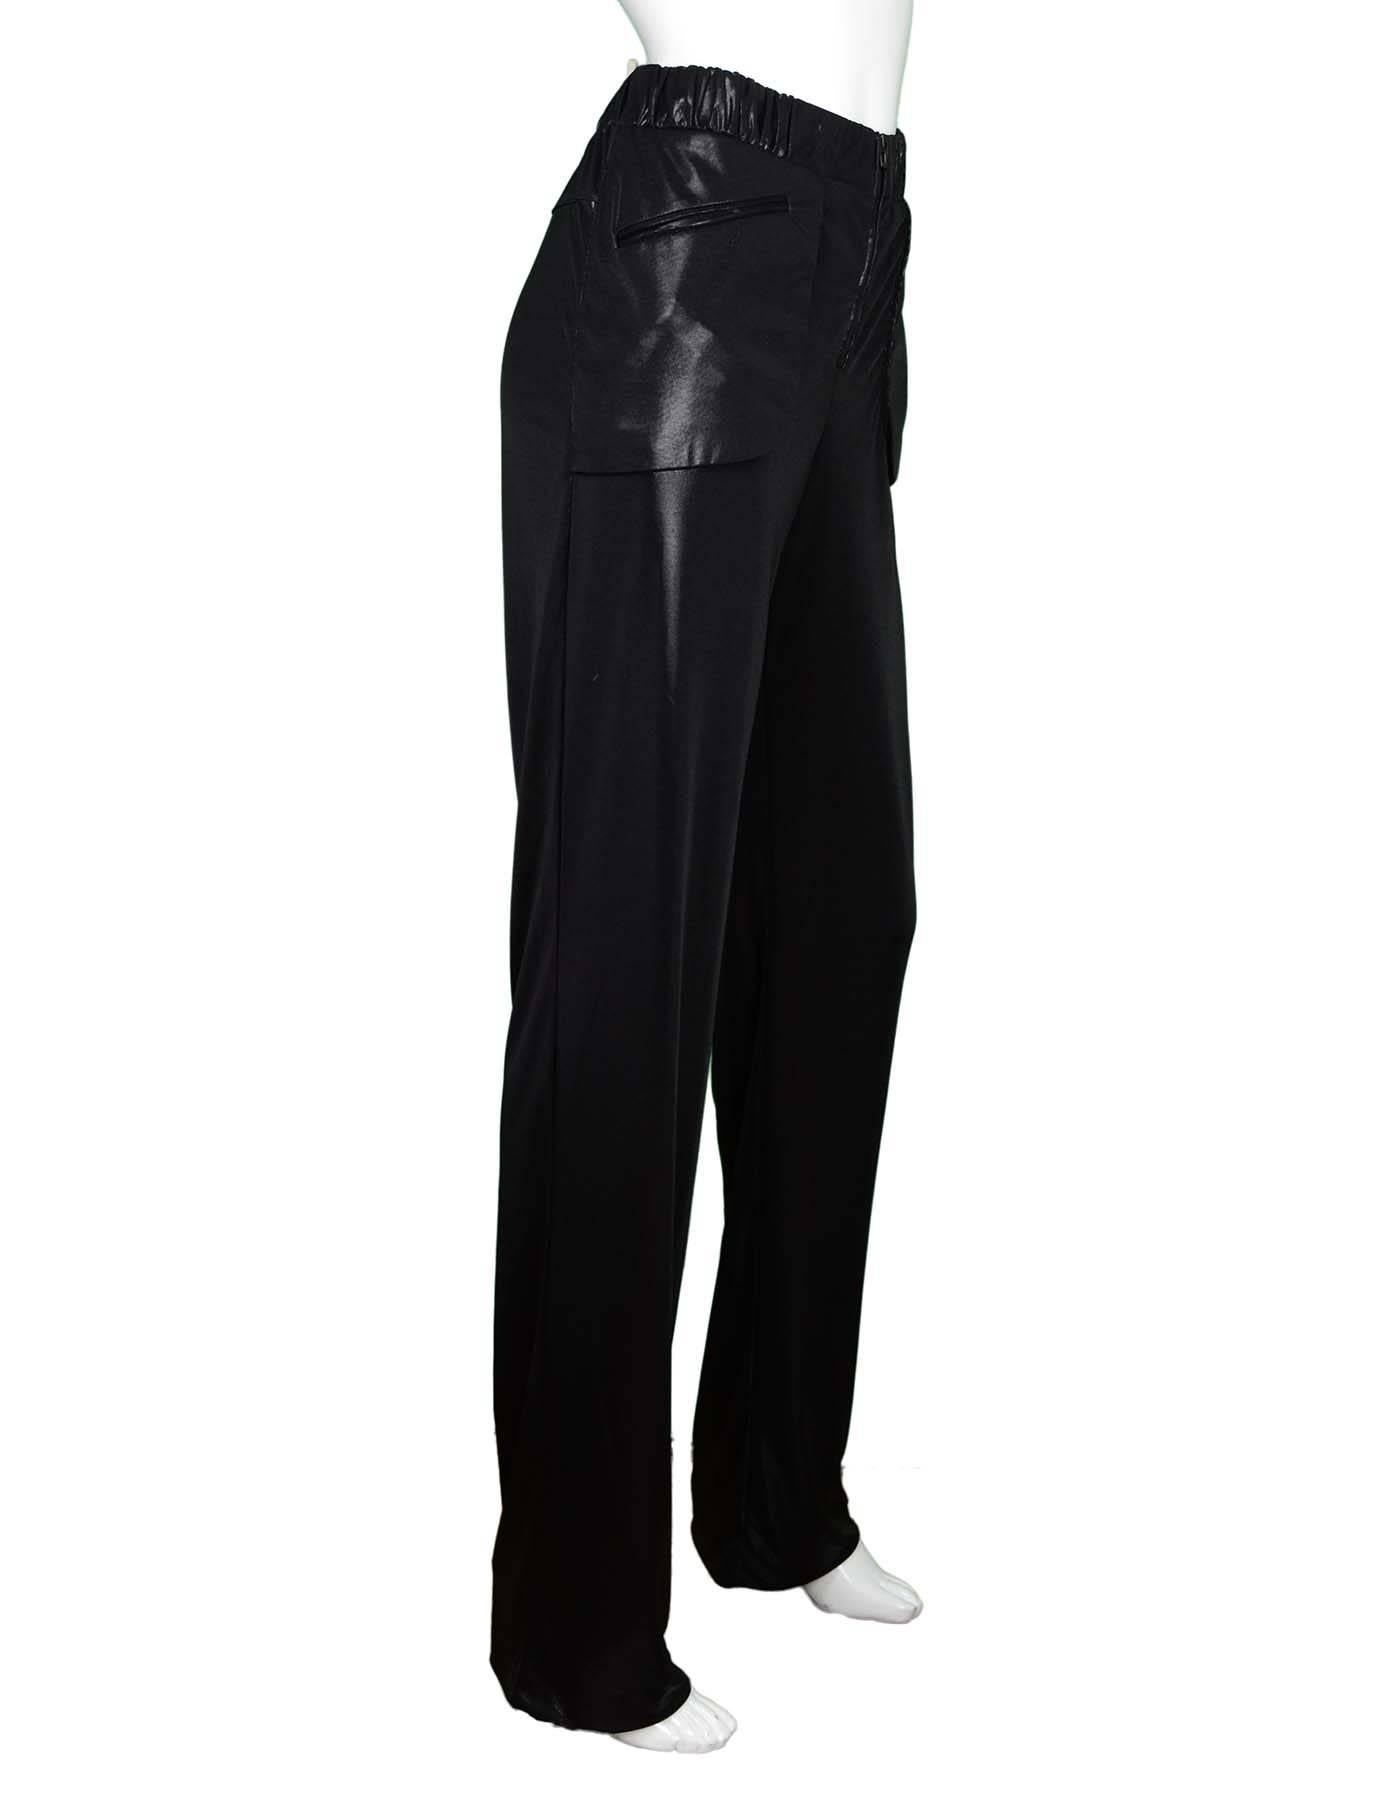 Chanel Black Lustrous Pants Sz 40
Features stretch waistband

Made In: Italy
Year of Production: Current
Color: Black
Composition: 100% Polyester
Lining: None
Closure/Opening: Zip front closure
Exterior Pockets: Faux hip pockets
Overall